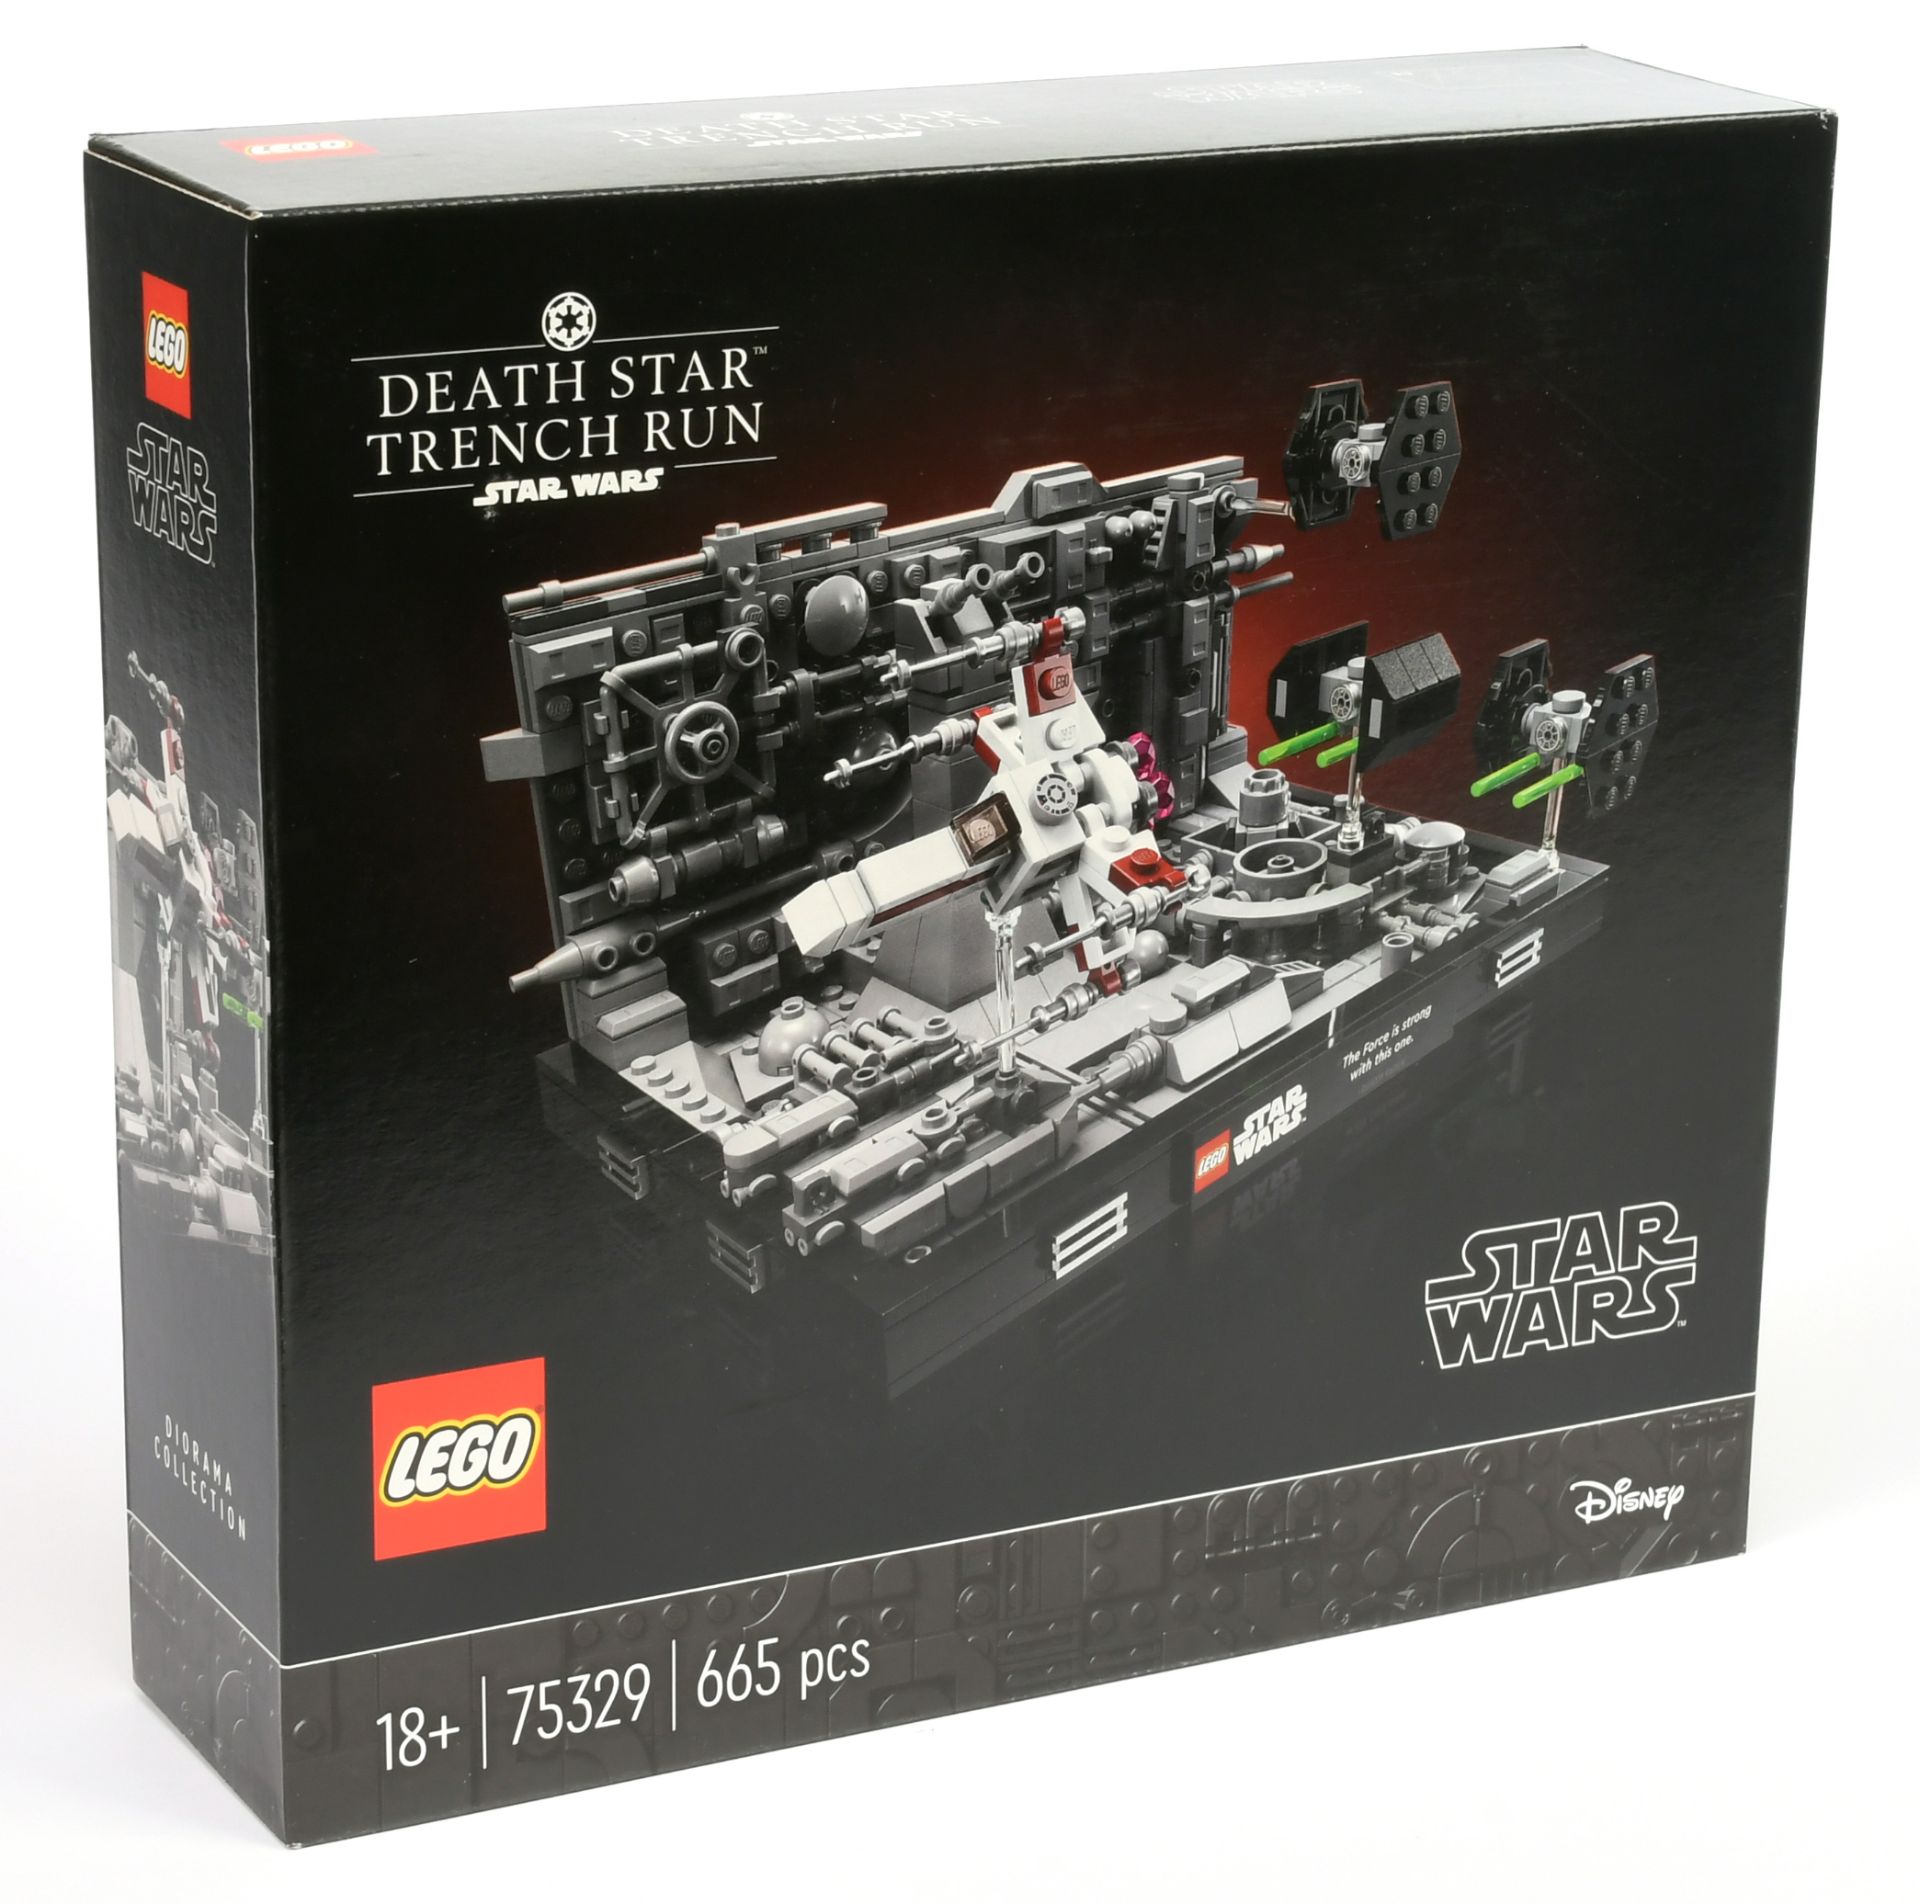 Lego Star Wars Death Star Trench Run set number 75329, within Near Mint sealed packaging.